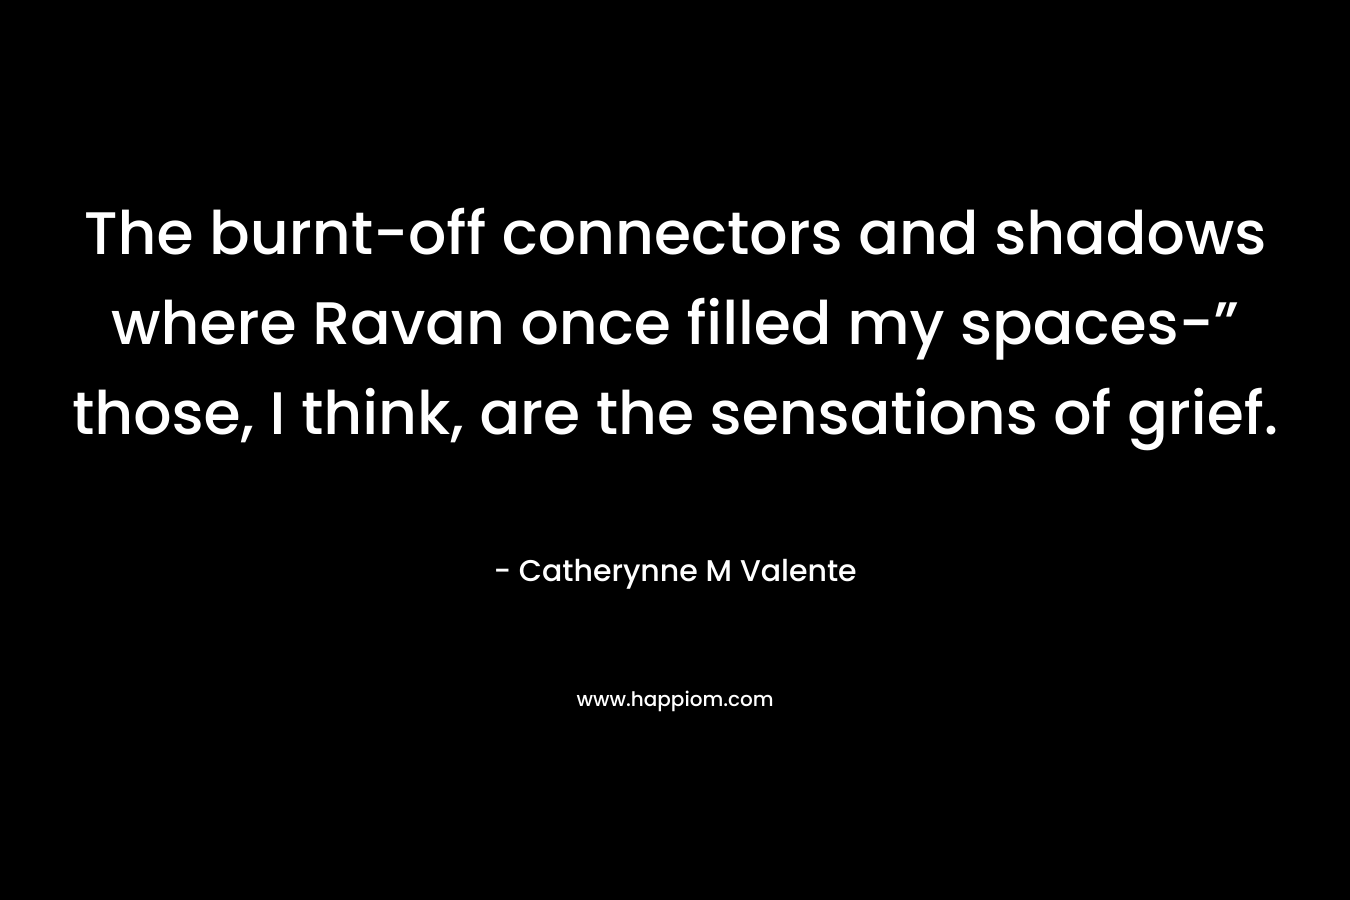 The burnt-off connectors and shadows where Ravan once filled my spaces-” those, I think, are the sensations of grief. – Catherynne M Valente